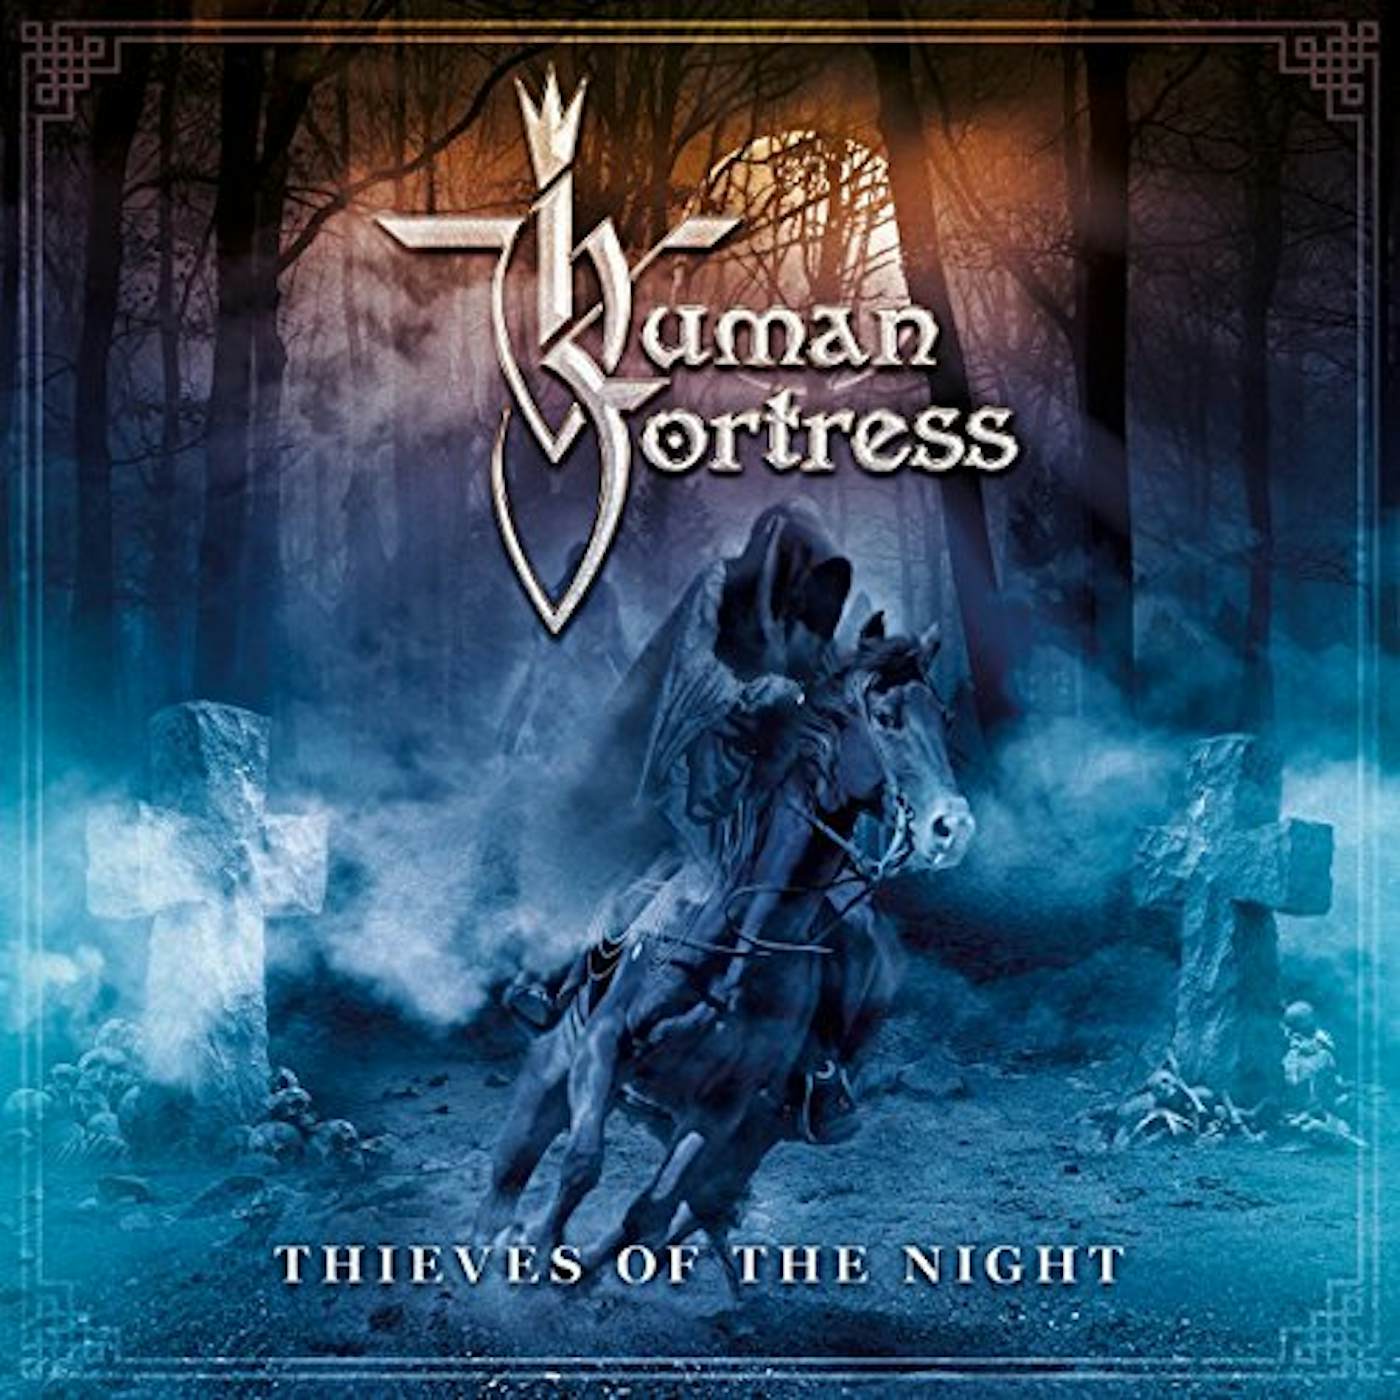 Human Fortress THIEVES OF THE NIGHT CD